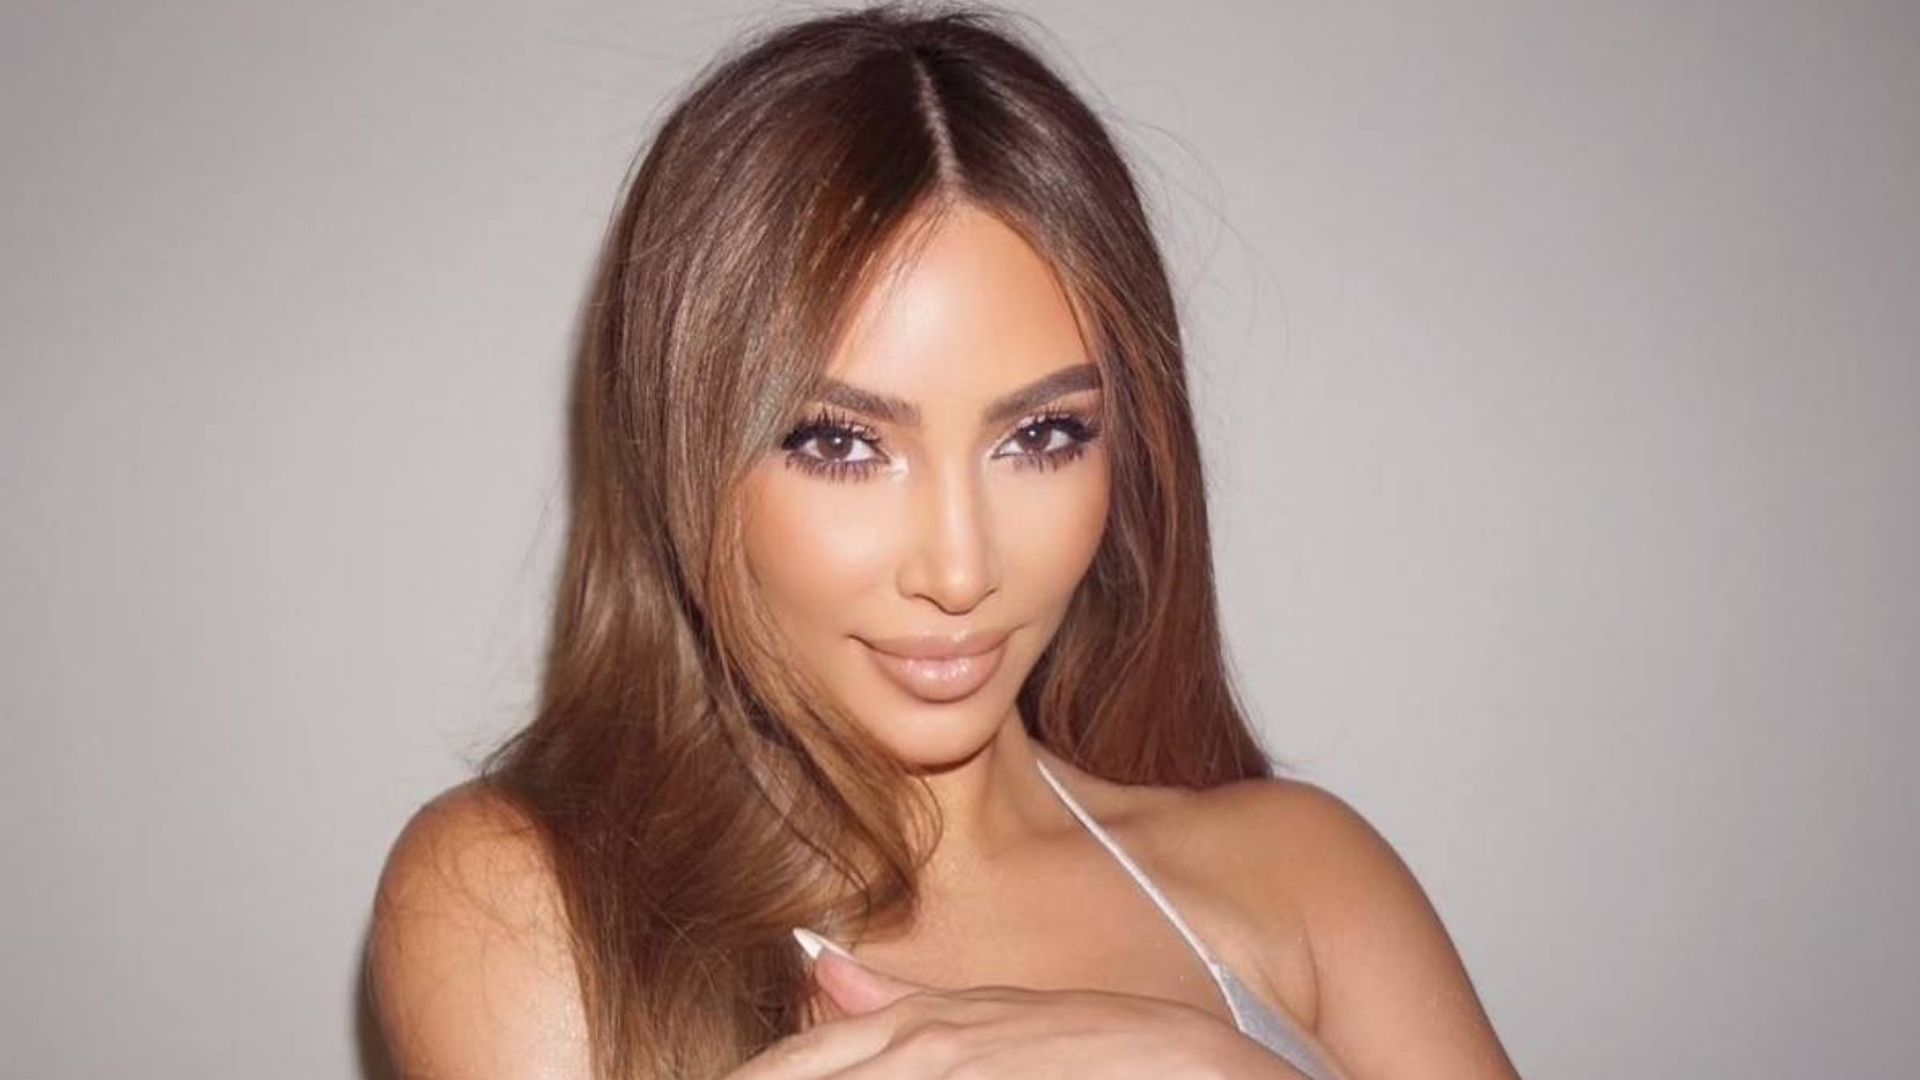 Kim Kardashian shares throwback photo and fans don't recognise her